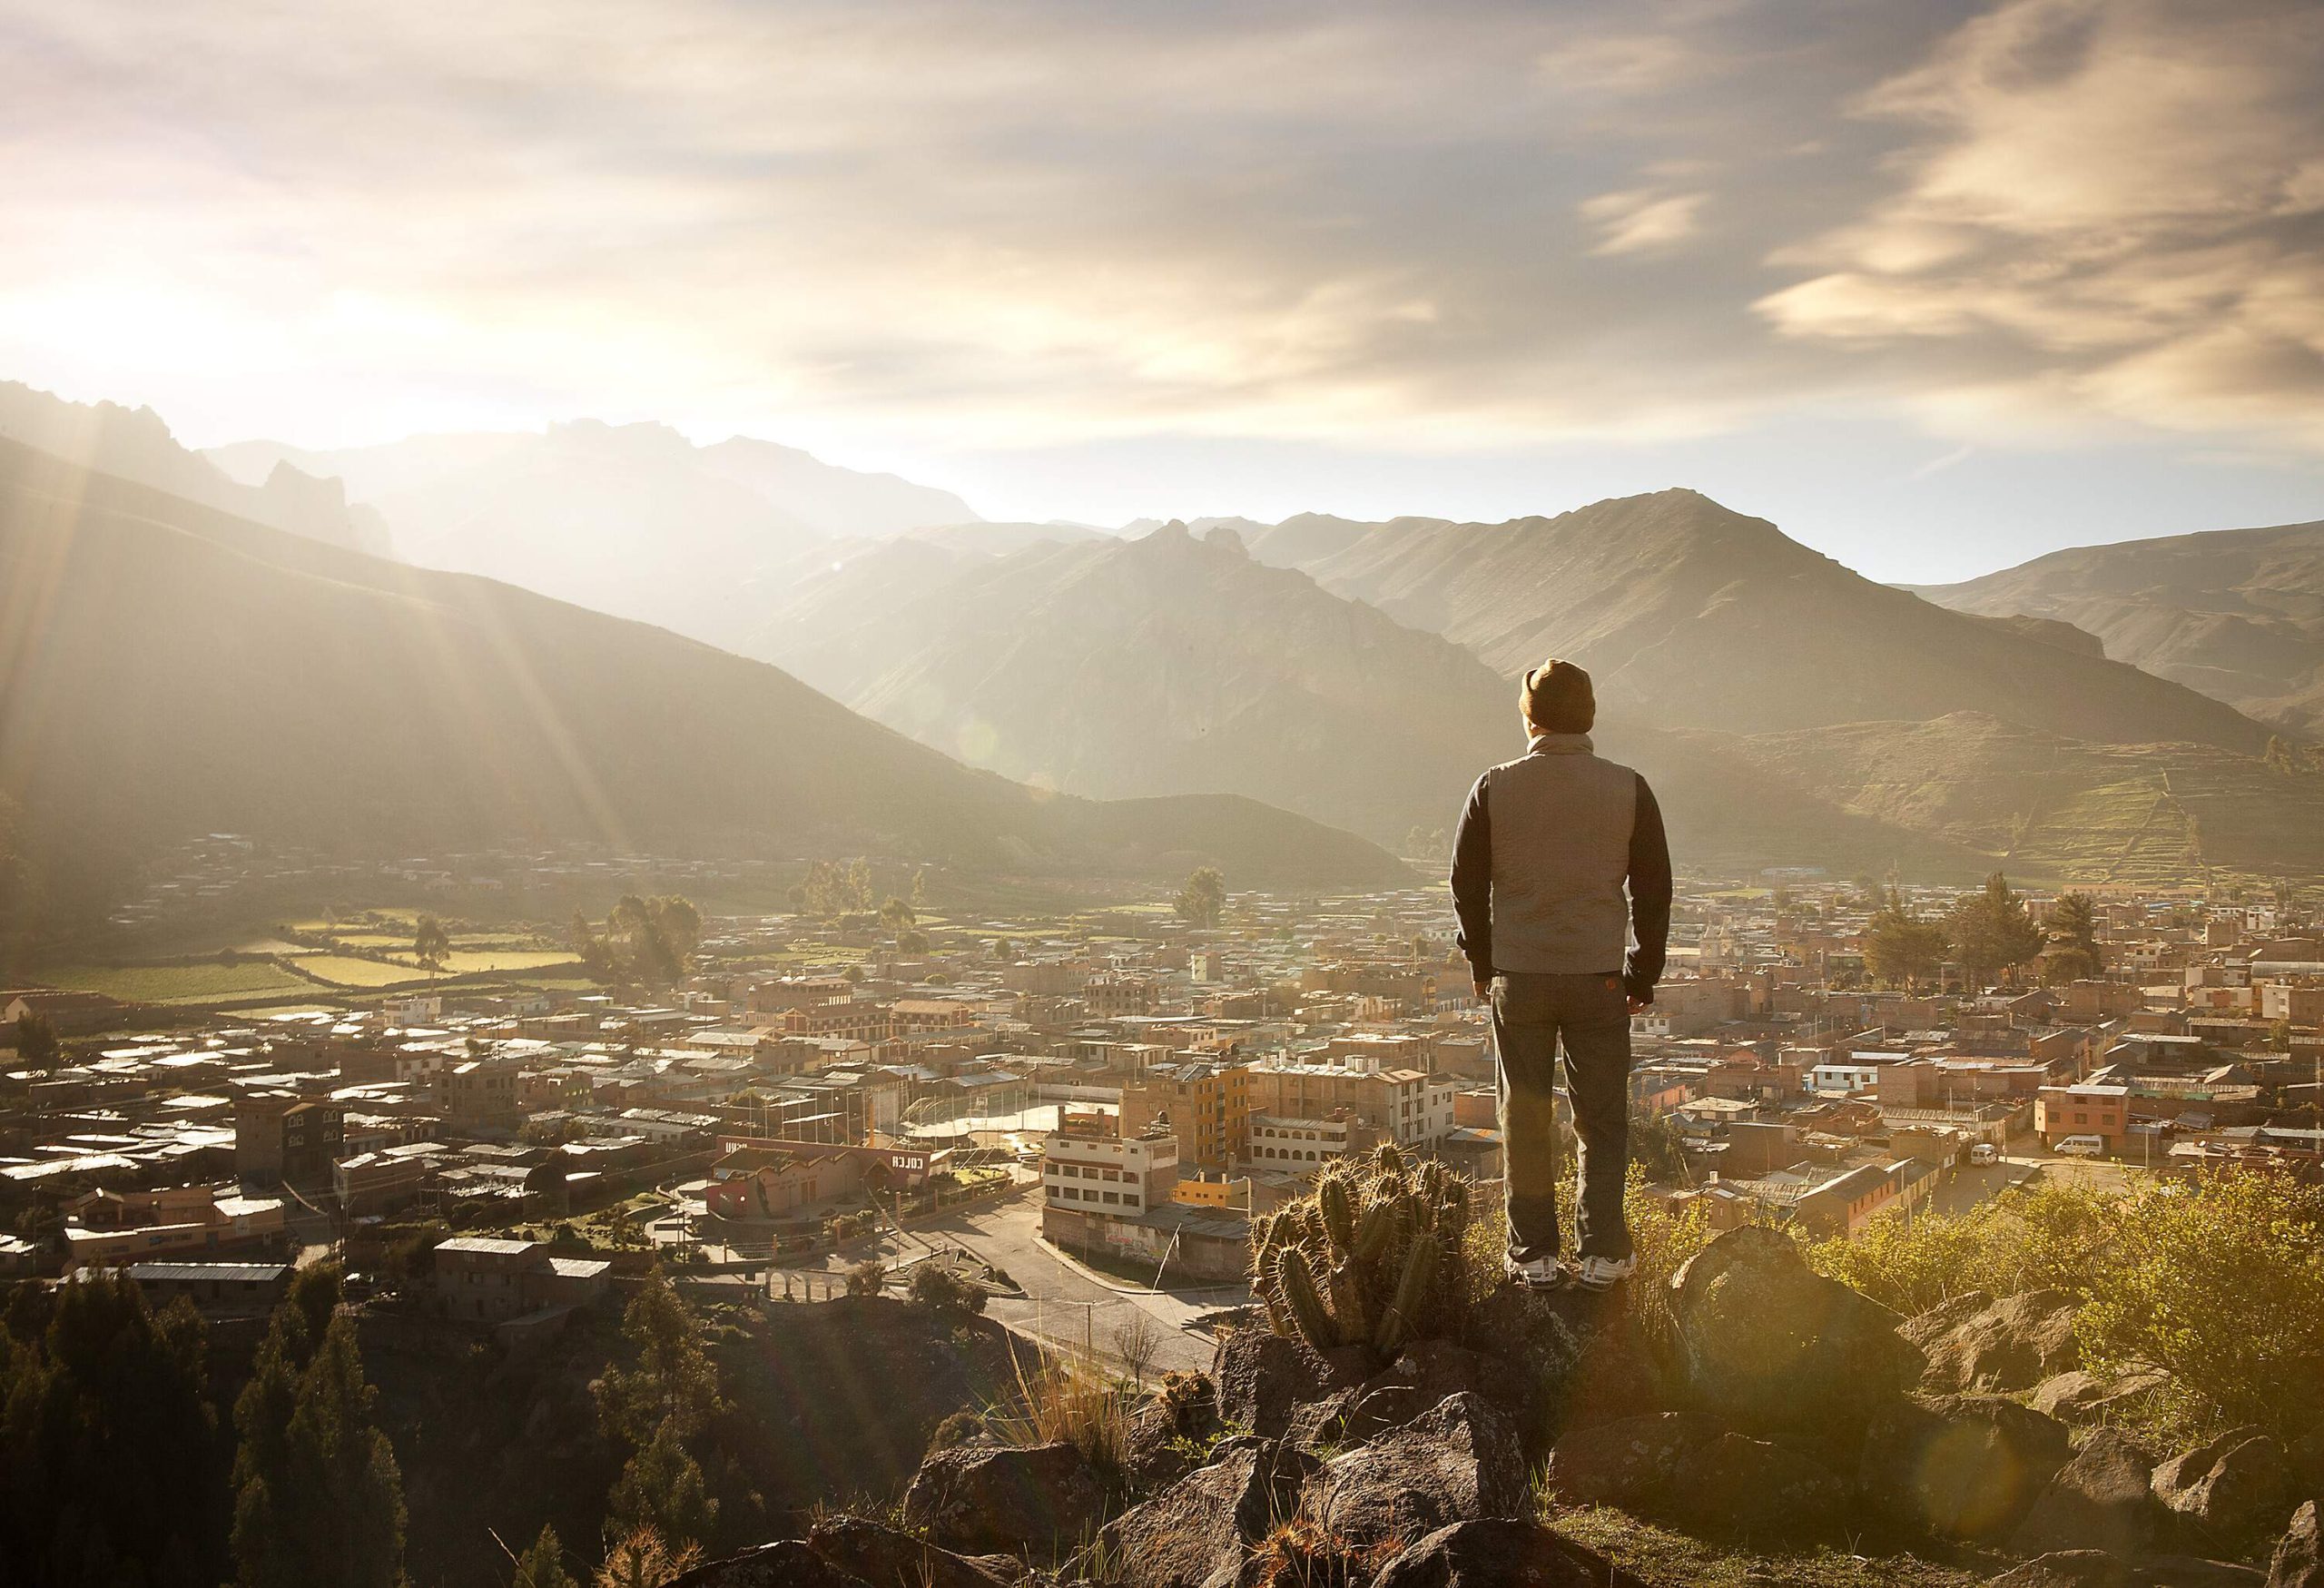 dest_peru_arequipa_yanque_andes_mountains_person_man_gettyimages-696830692_universal_within-usage-period_79417